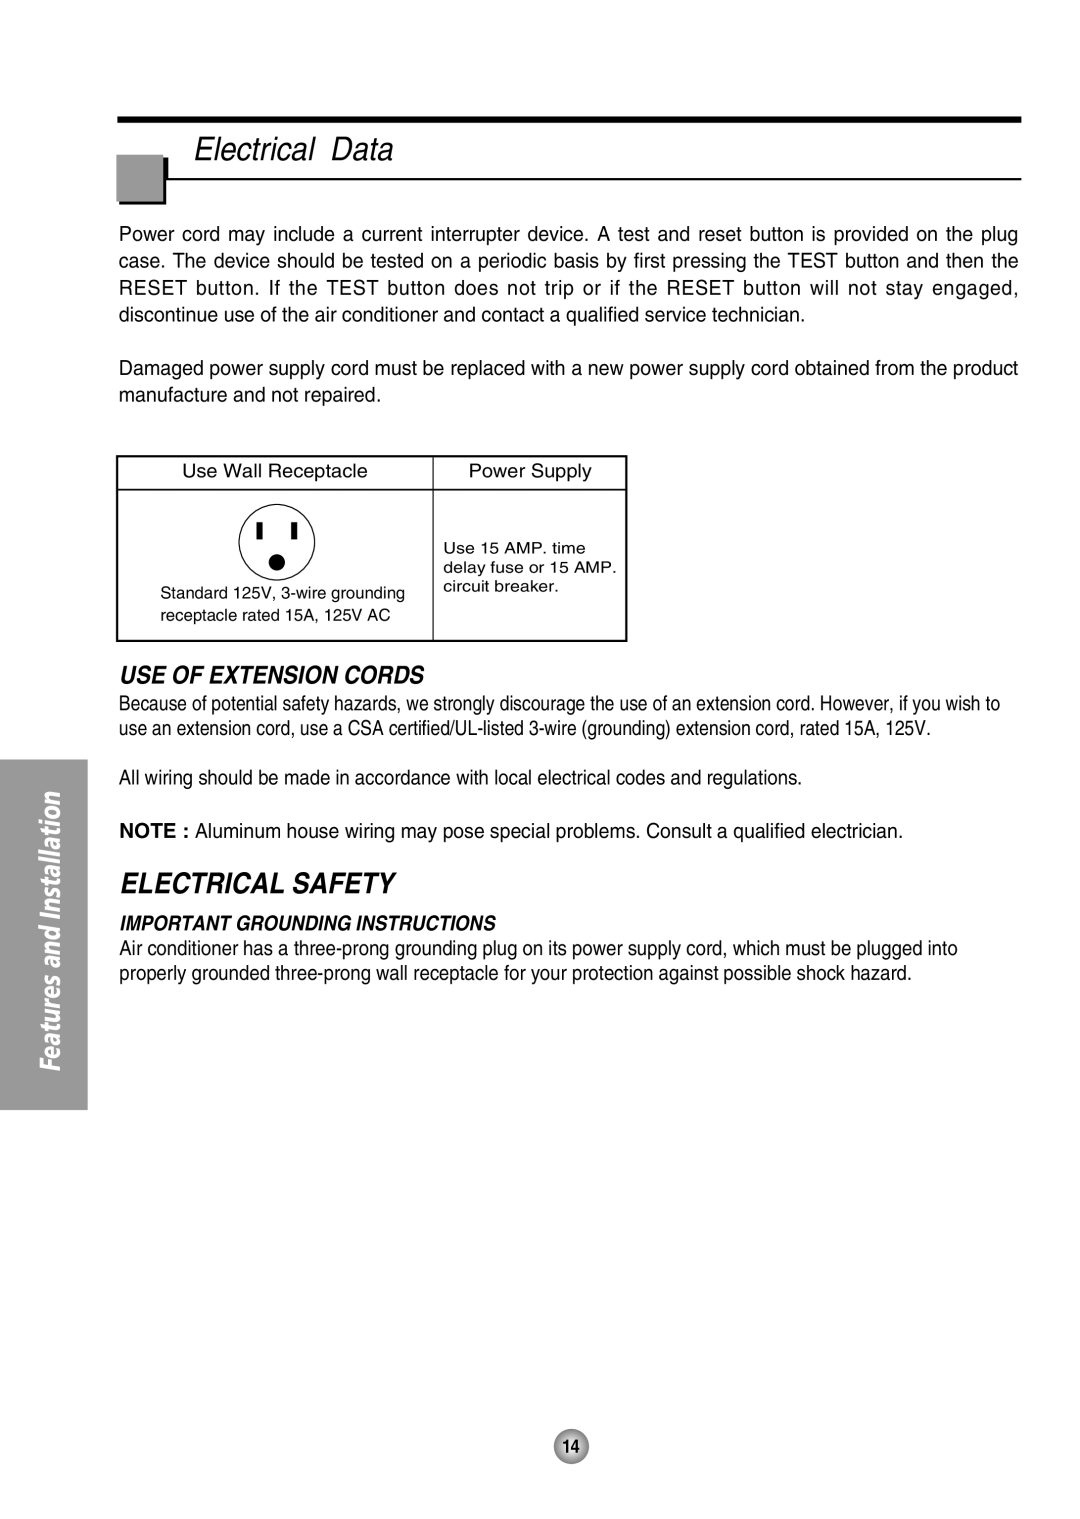 Panasonic CW-XC105HU Electrical Data, Use Of Extension Cords, Important Grounding Instructions, Electrical Safety 